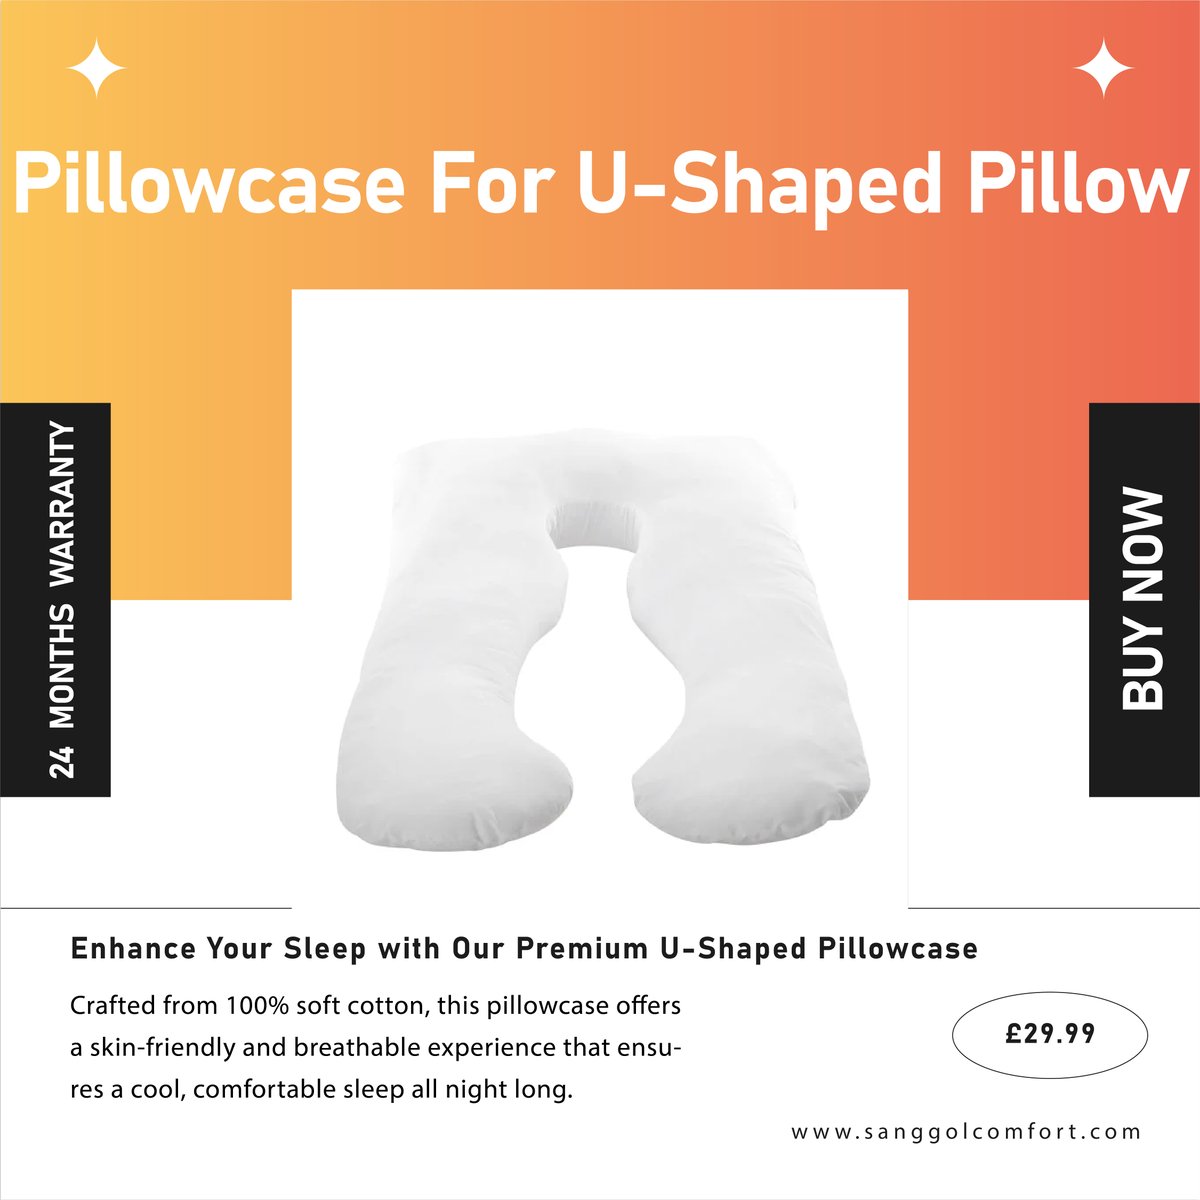 Complete your sleep sanctuary with our ultra-soft pillowcase for U-shaped pillows! 😴✨ Crafted for maximum comfort, it's the perfect finishing touch for your bedtime bliss. 💤
#Pillowcase #UShapedPillow #SleepComfort #BedroomDecor #PillowPerfection